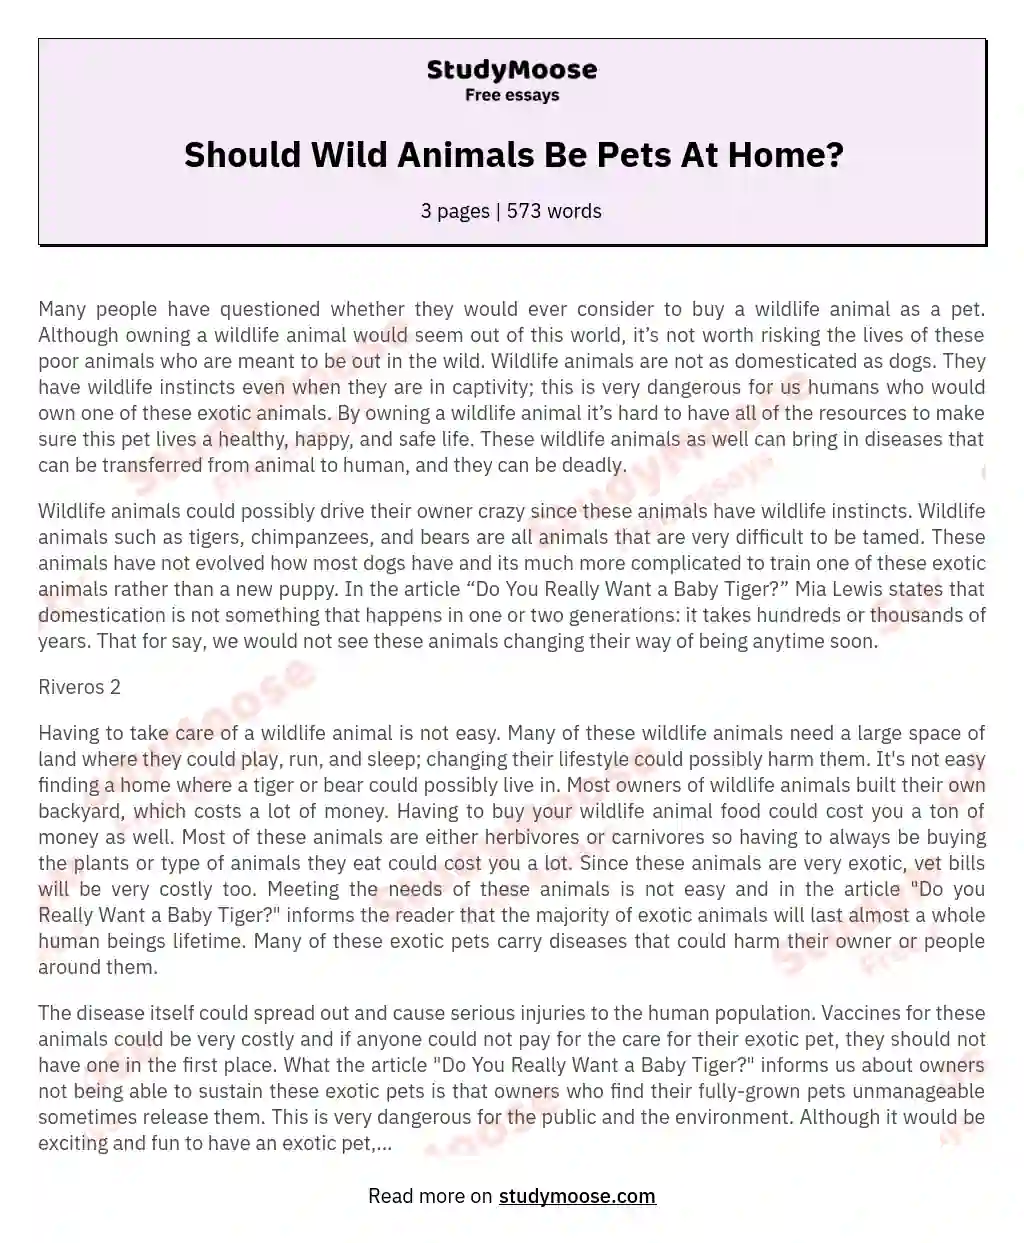 Should Wild Animals Be Pets At Home? Free Essay Example